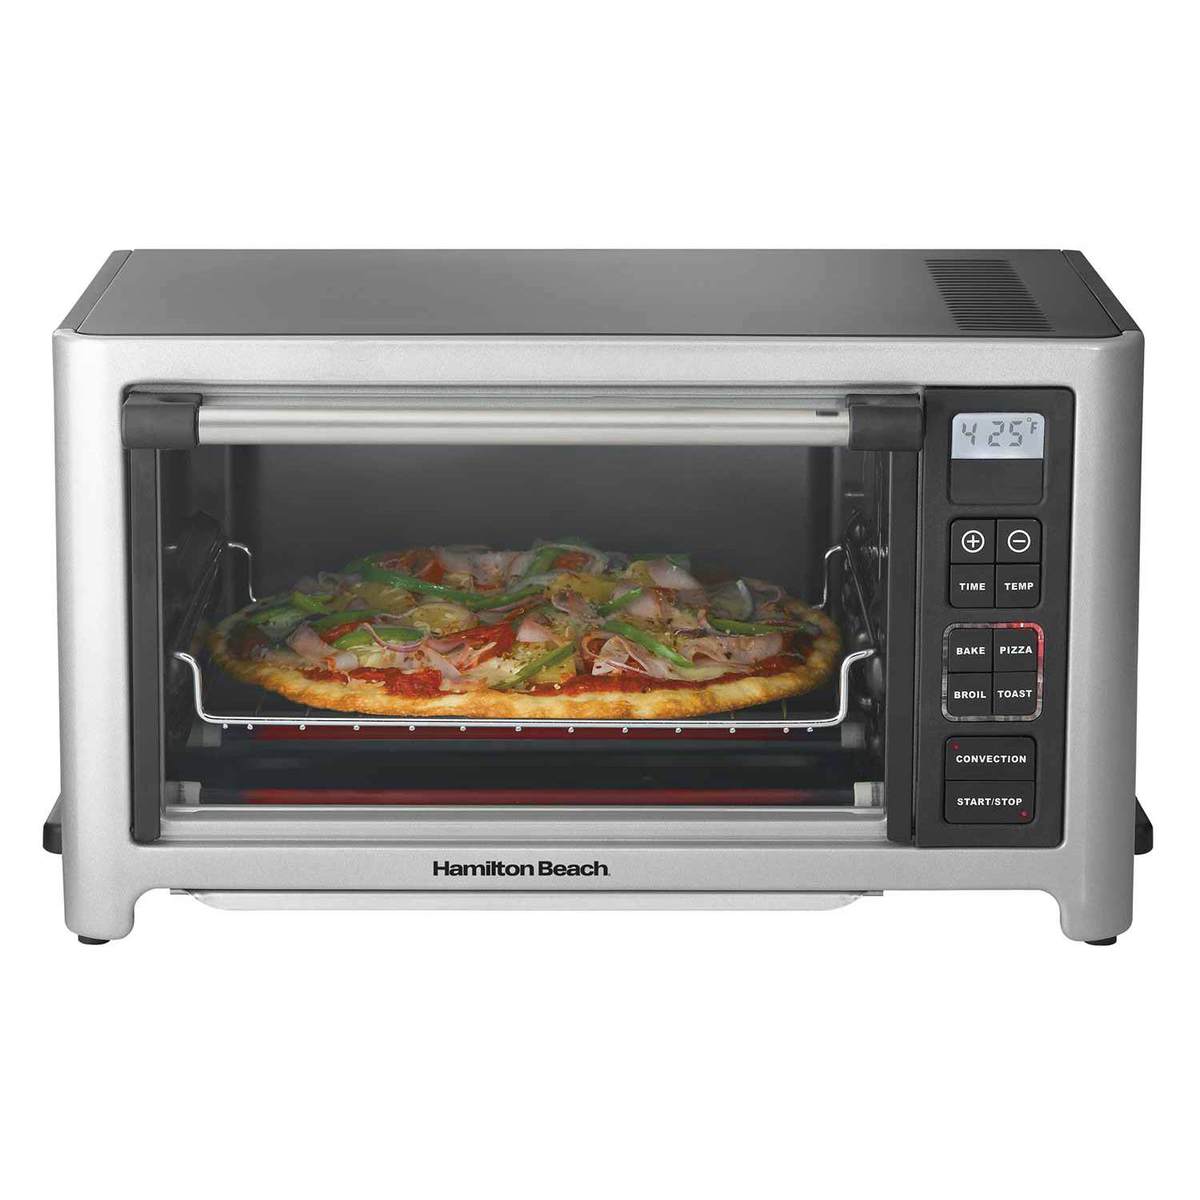 Convection 6 Slice Nonstick Toaster Oven/Broiler (31150)